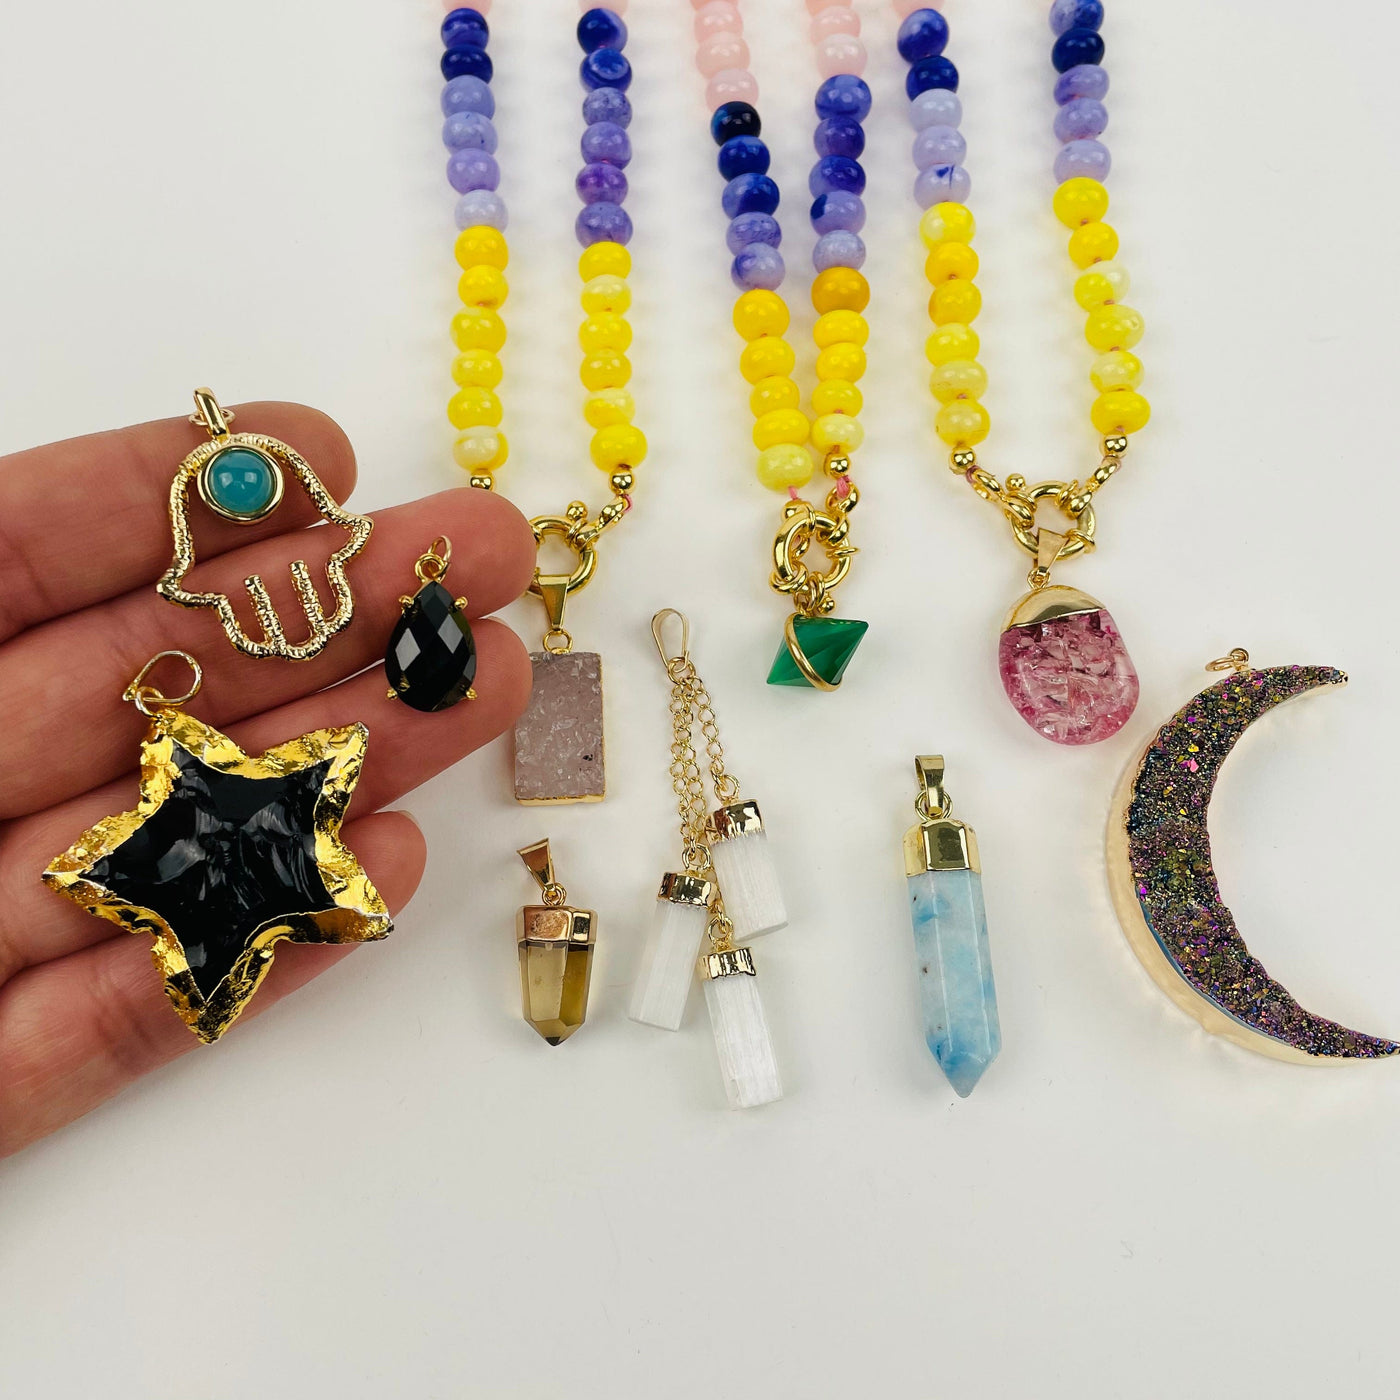 pendants displayed in hand for size reference